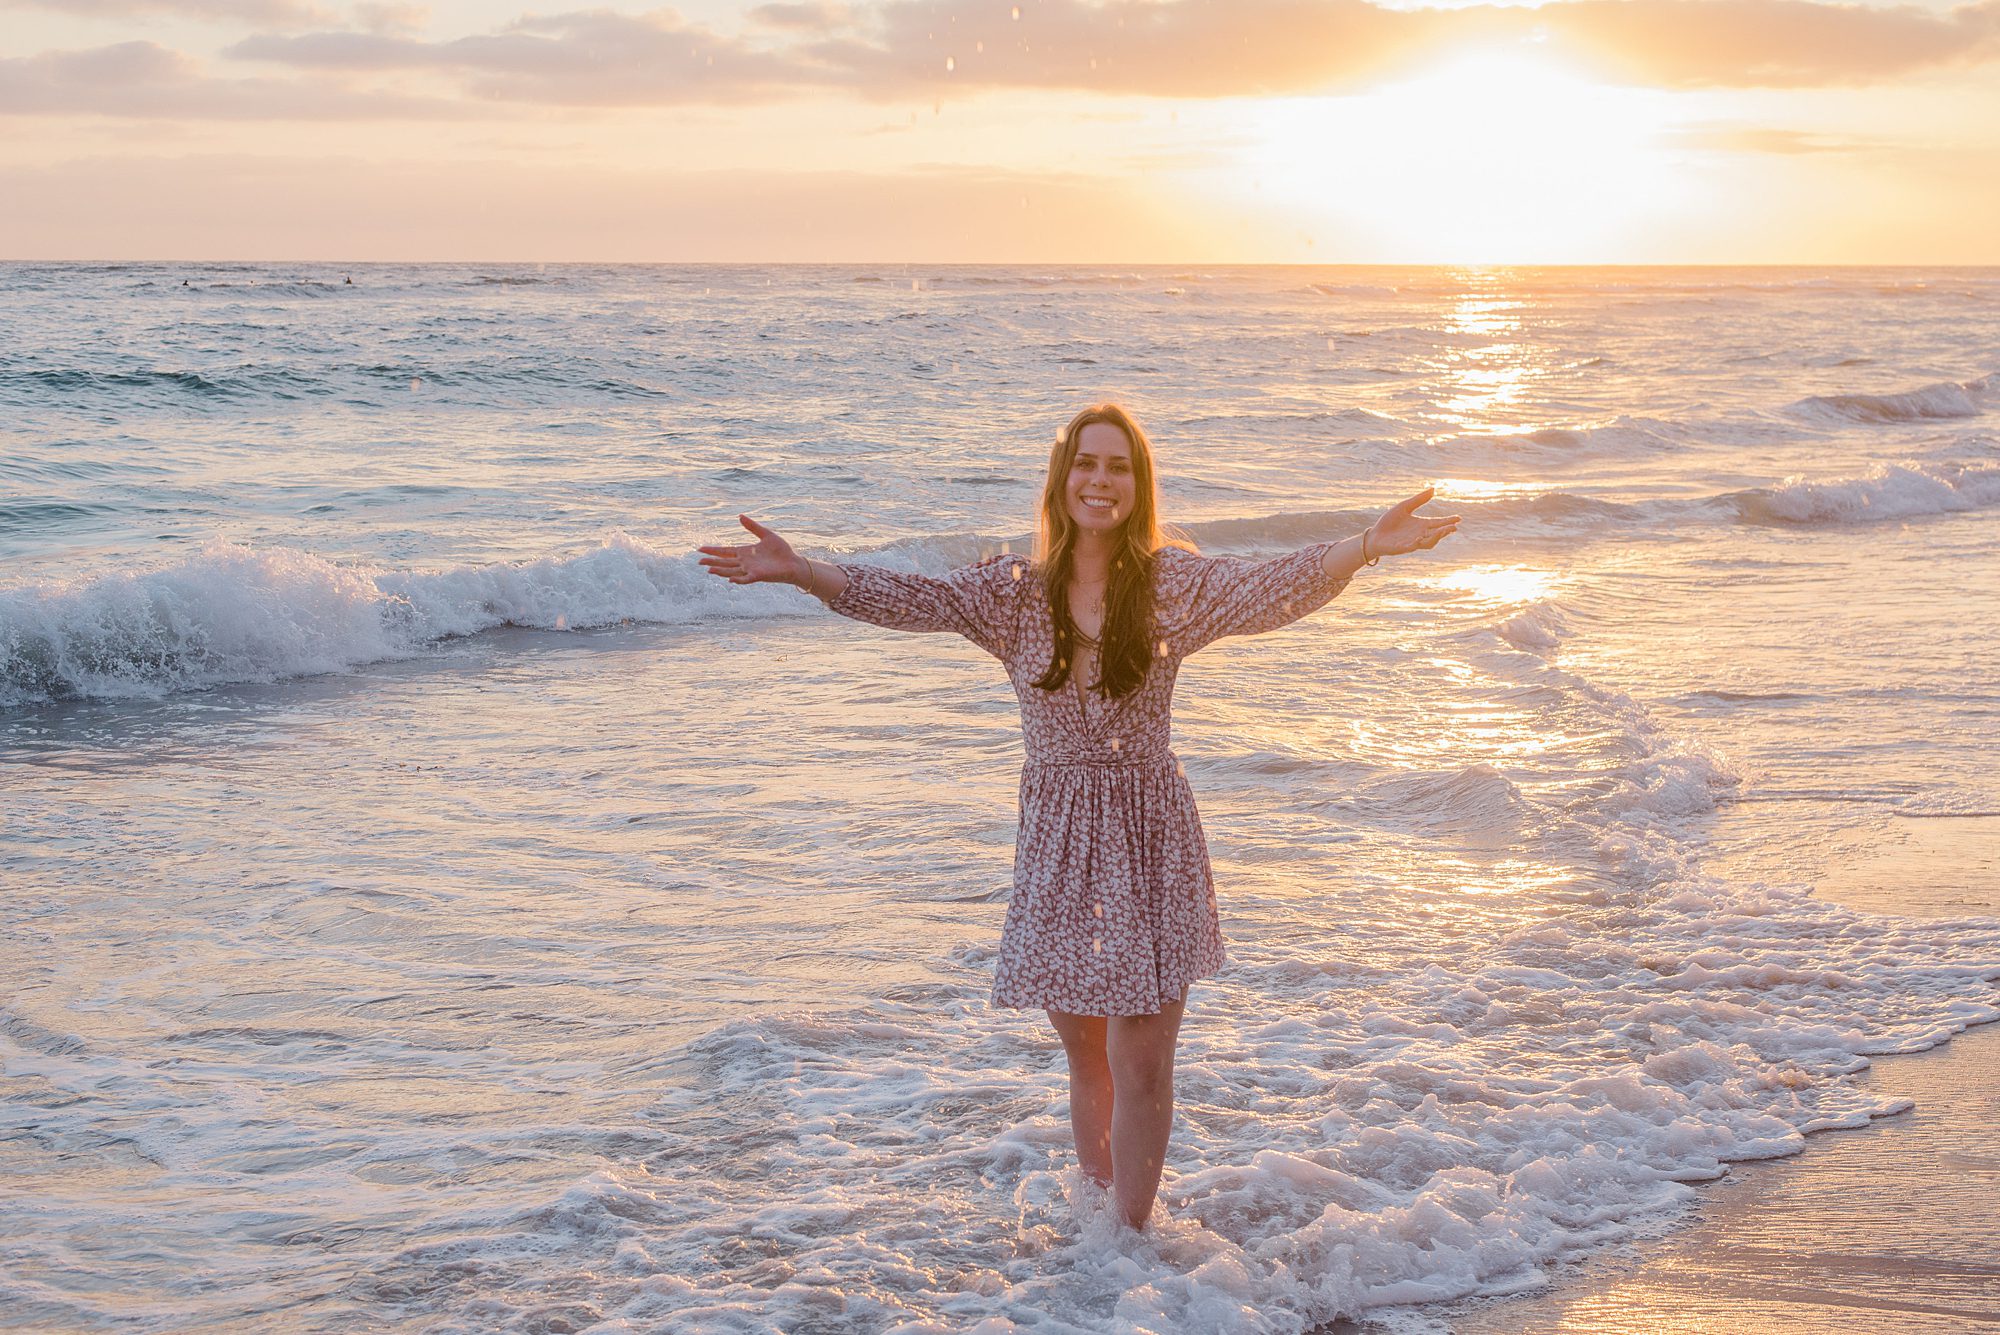 Sunset Beach Senior Session in Carlsbad, California photographed by San Diego Senior session